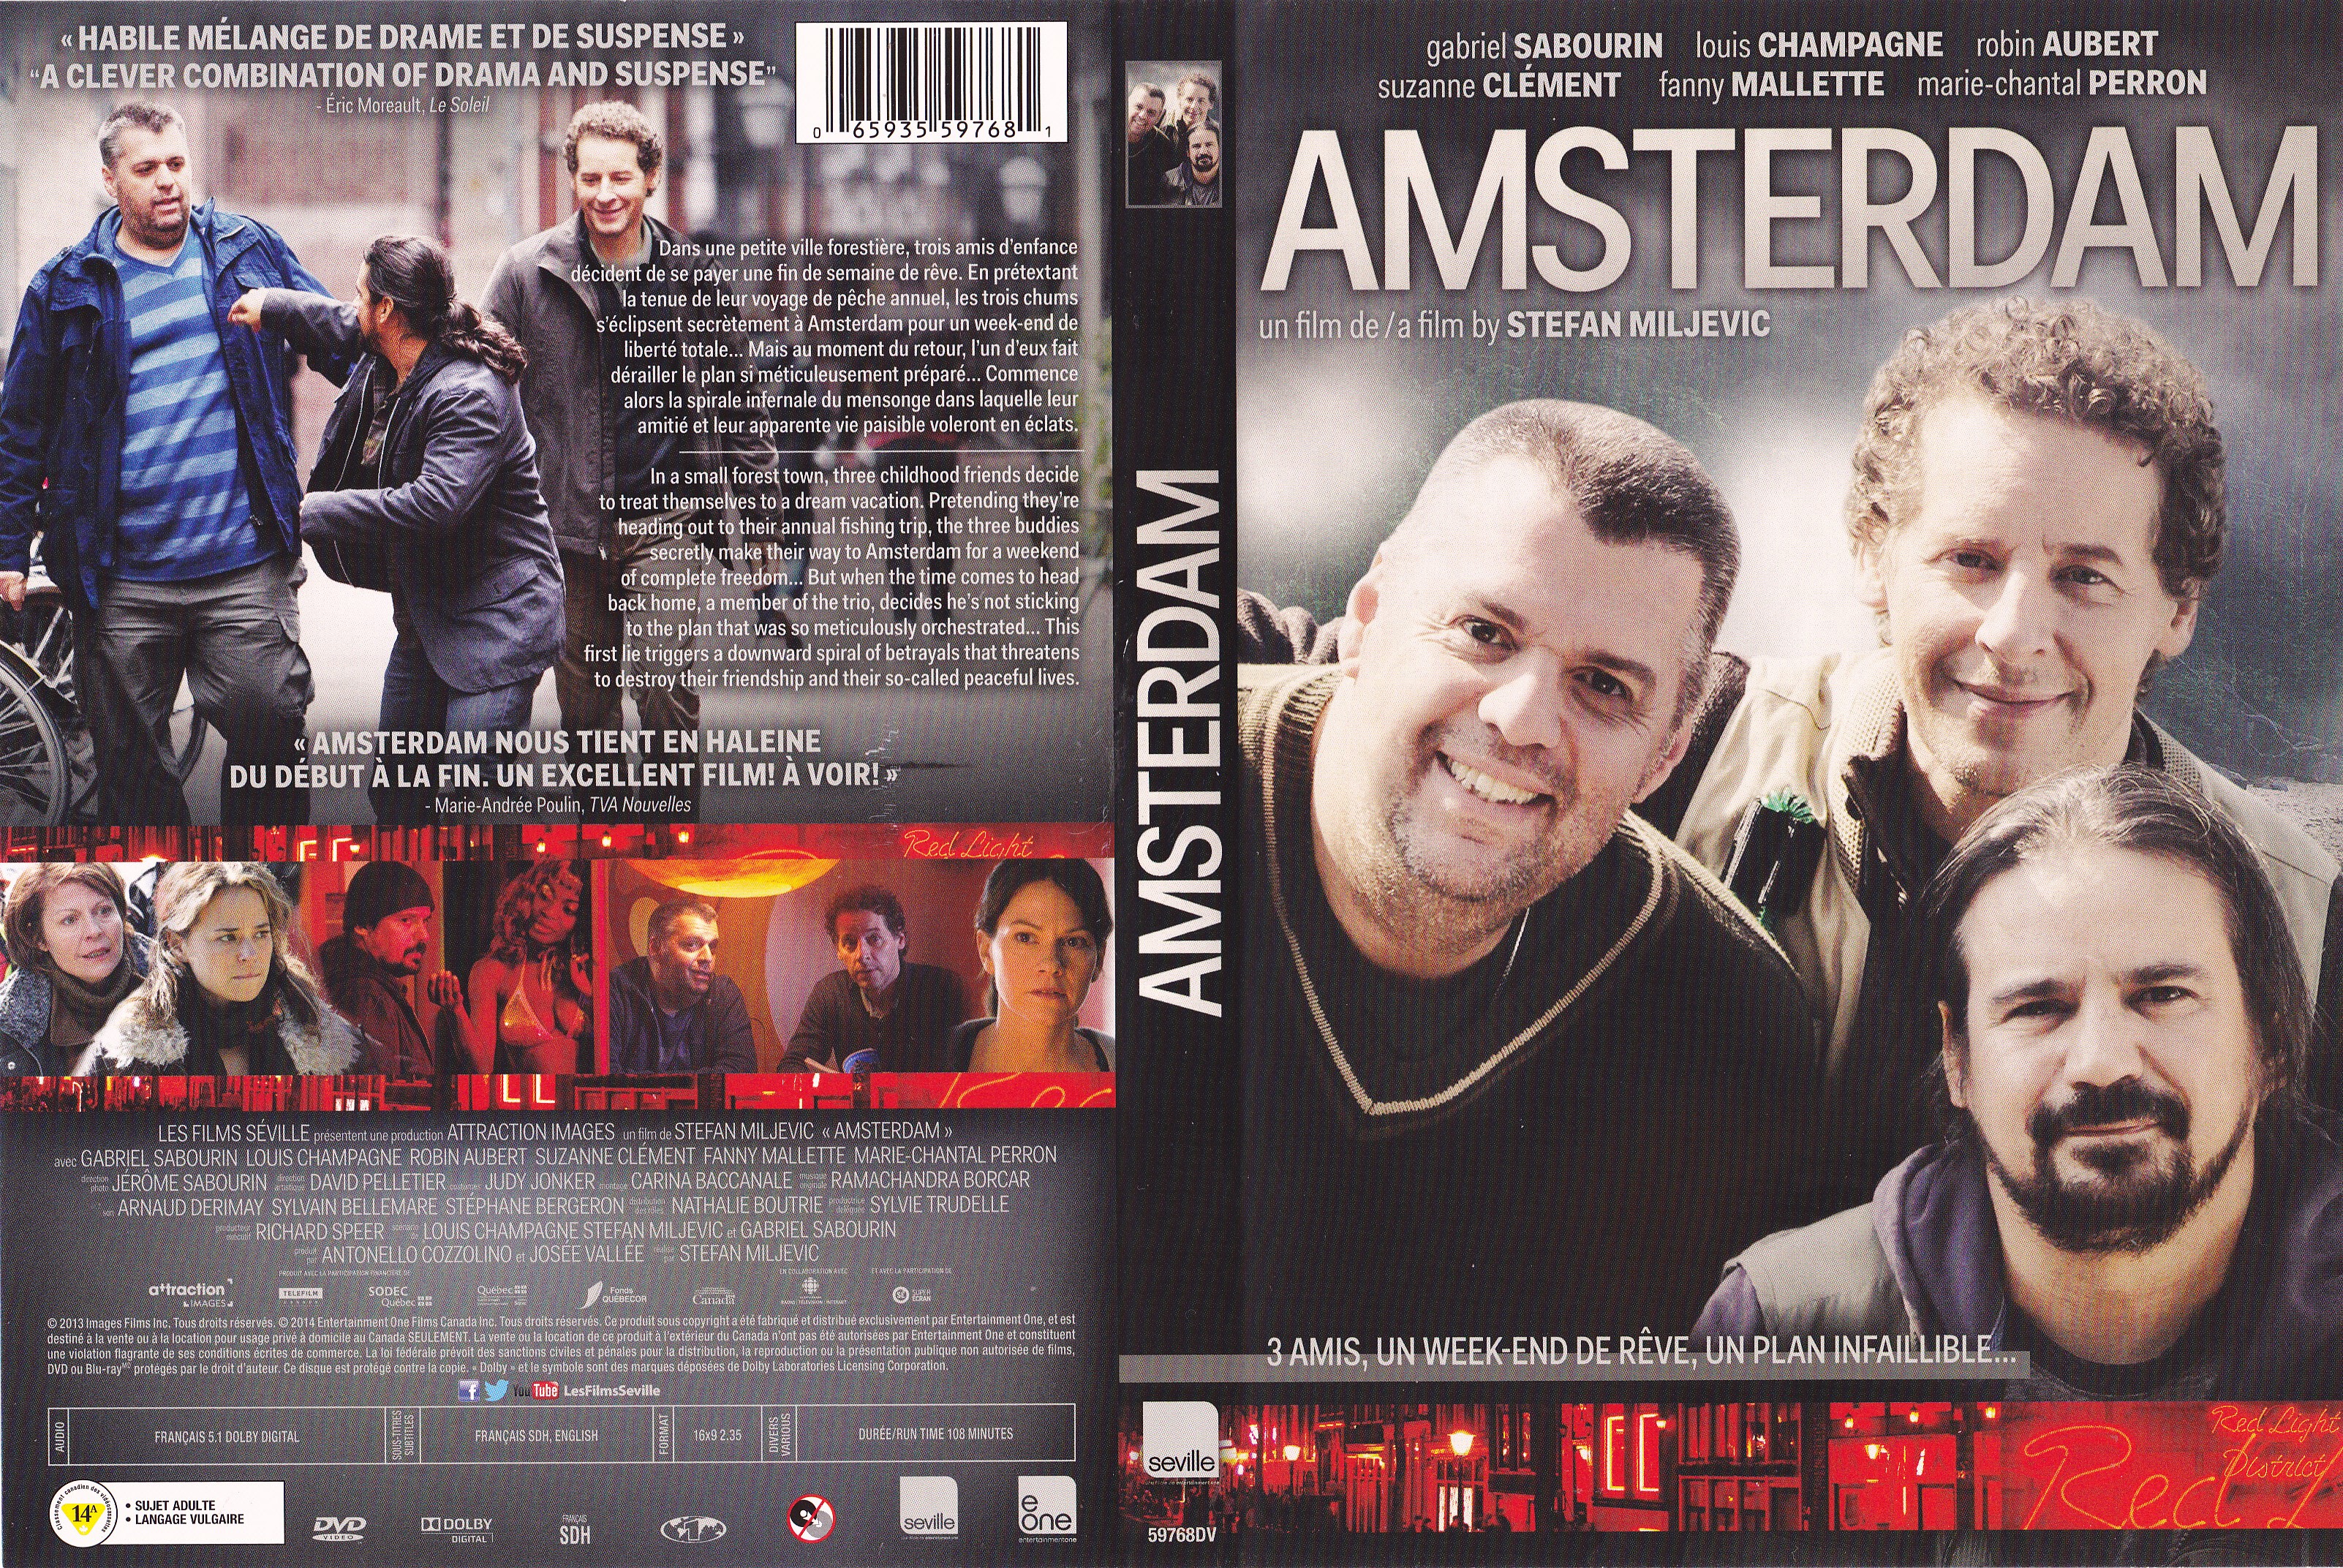 Jaquette DVD Amsterdam (Canadienne)